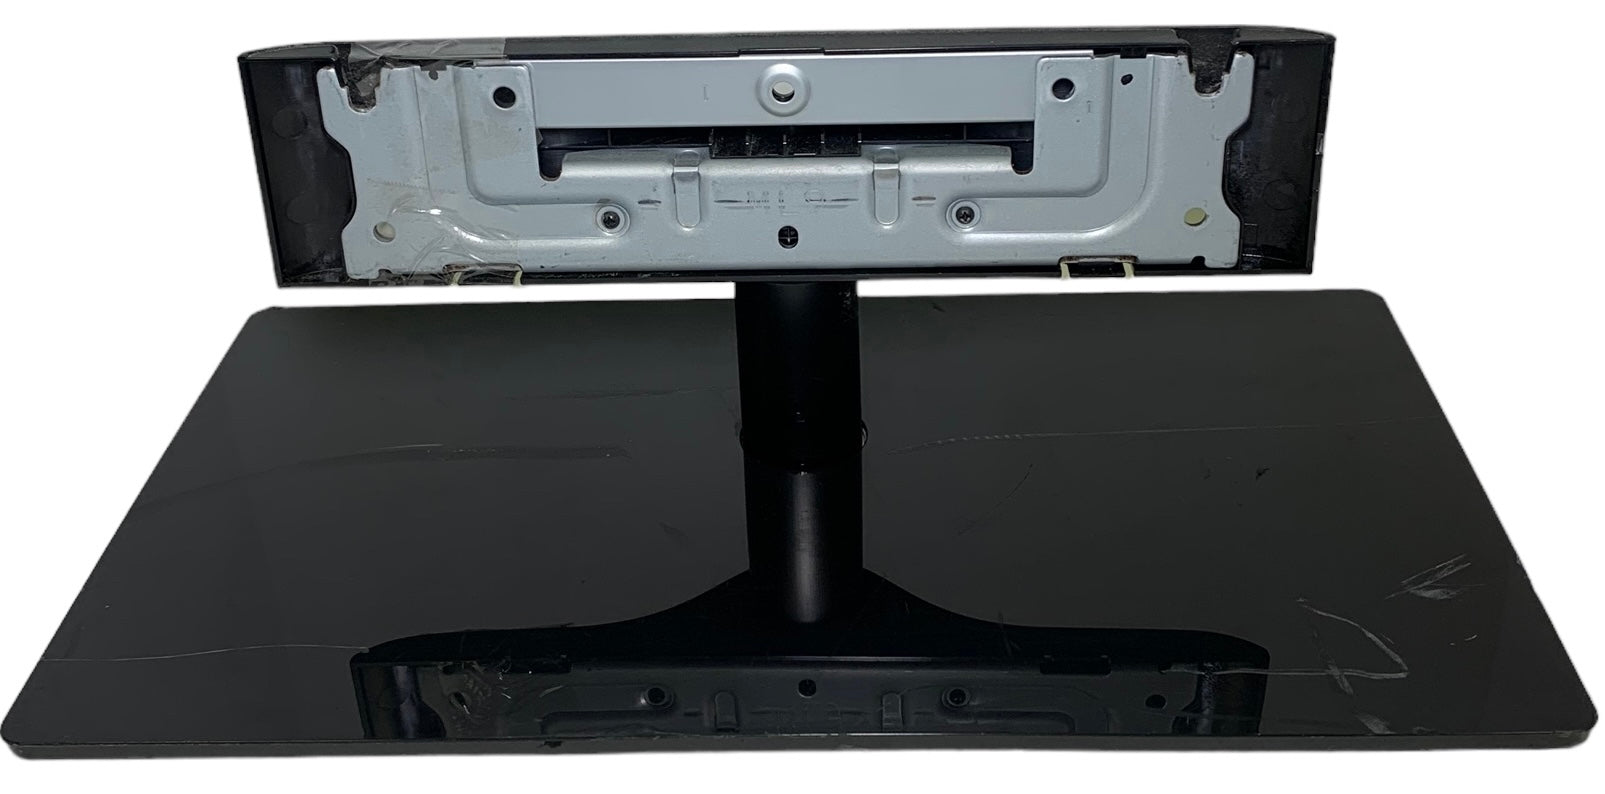 Sony KDL-46EX523 TV Stand/Base